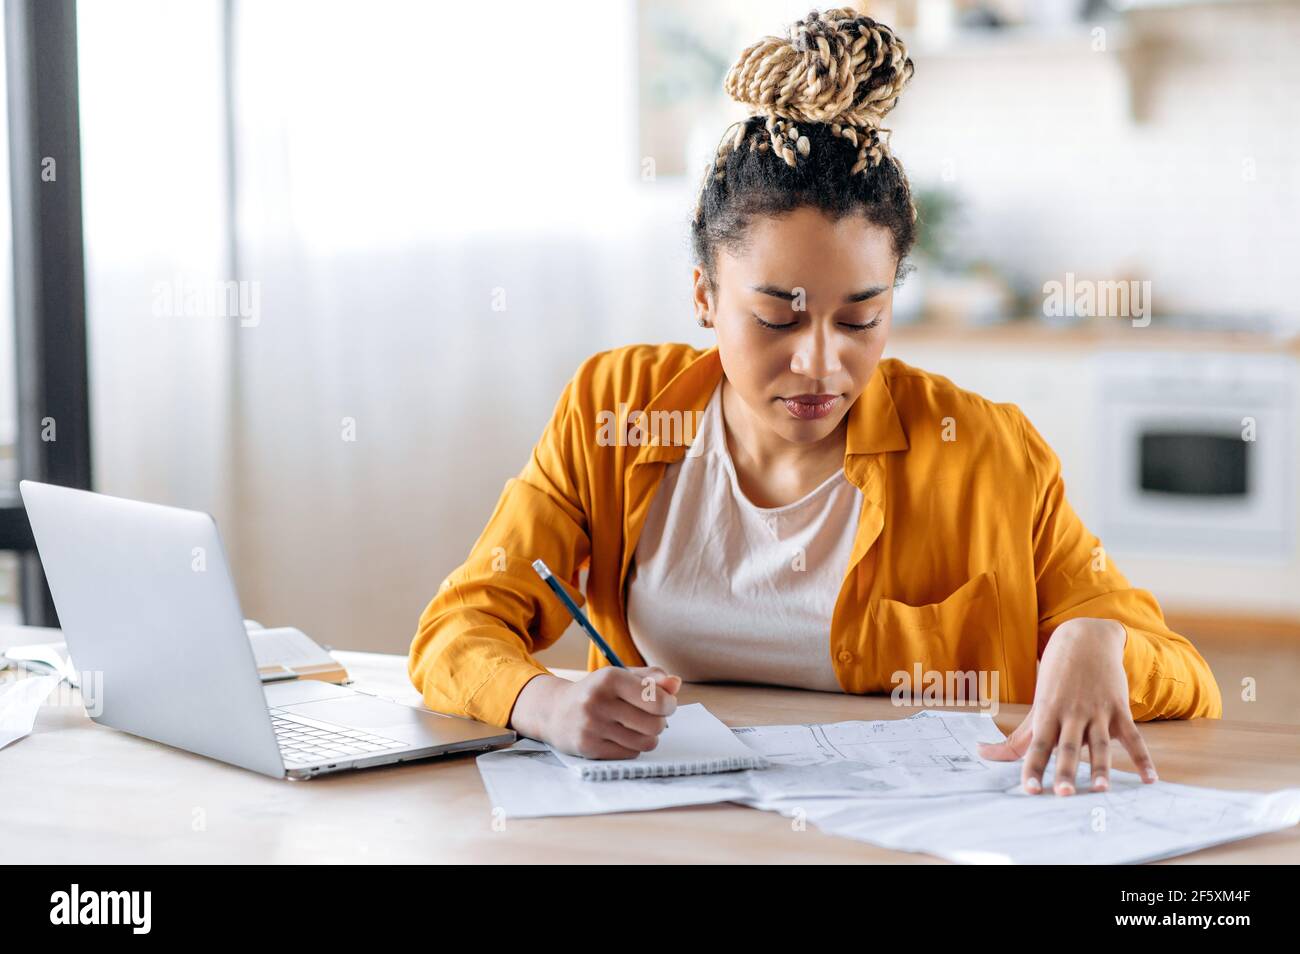 Confident smart focused african american female student or designer wearing stylish casual clothes, studying or working remotely, using laptop, taking notes, examines blueprints. Work from home Stock Photo